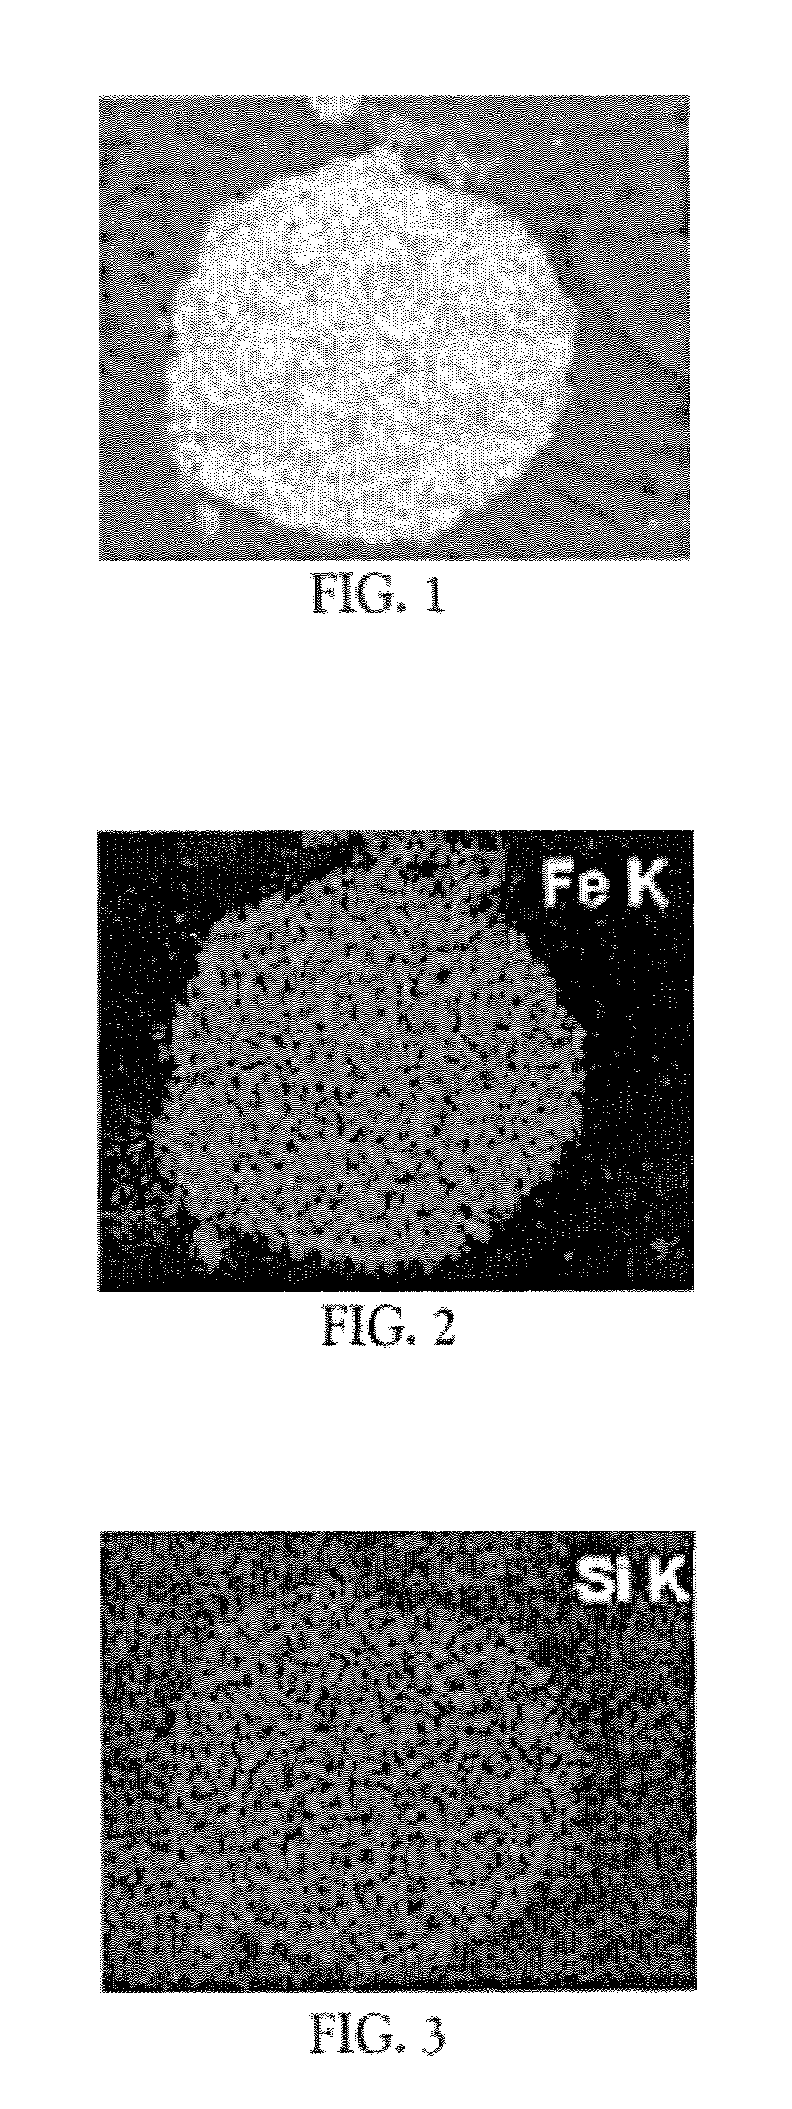 Attrition resistant bulk iron catalysts and processes for preparing and using same